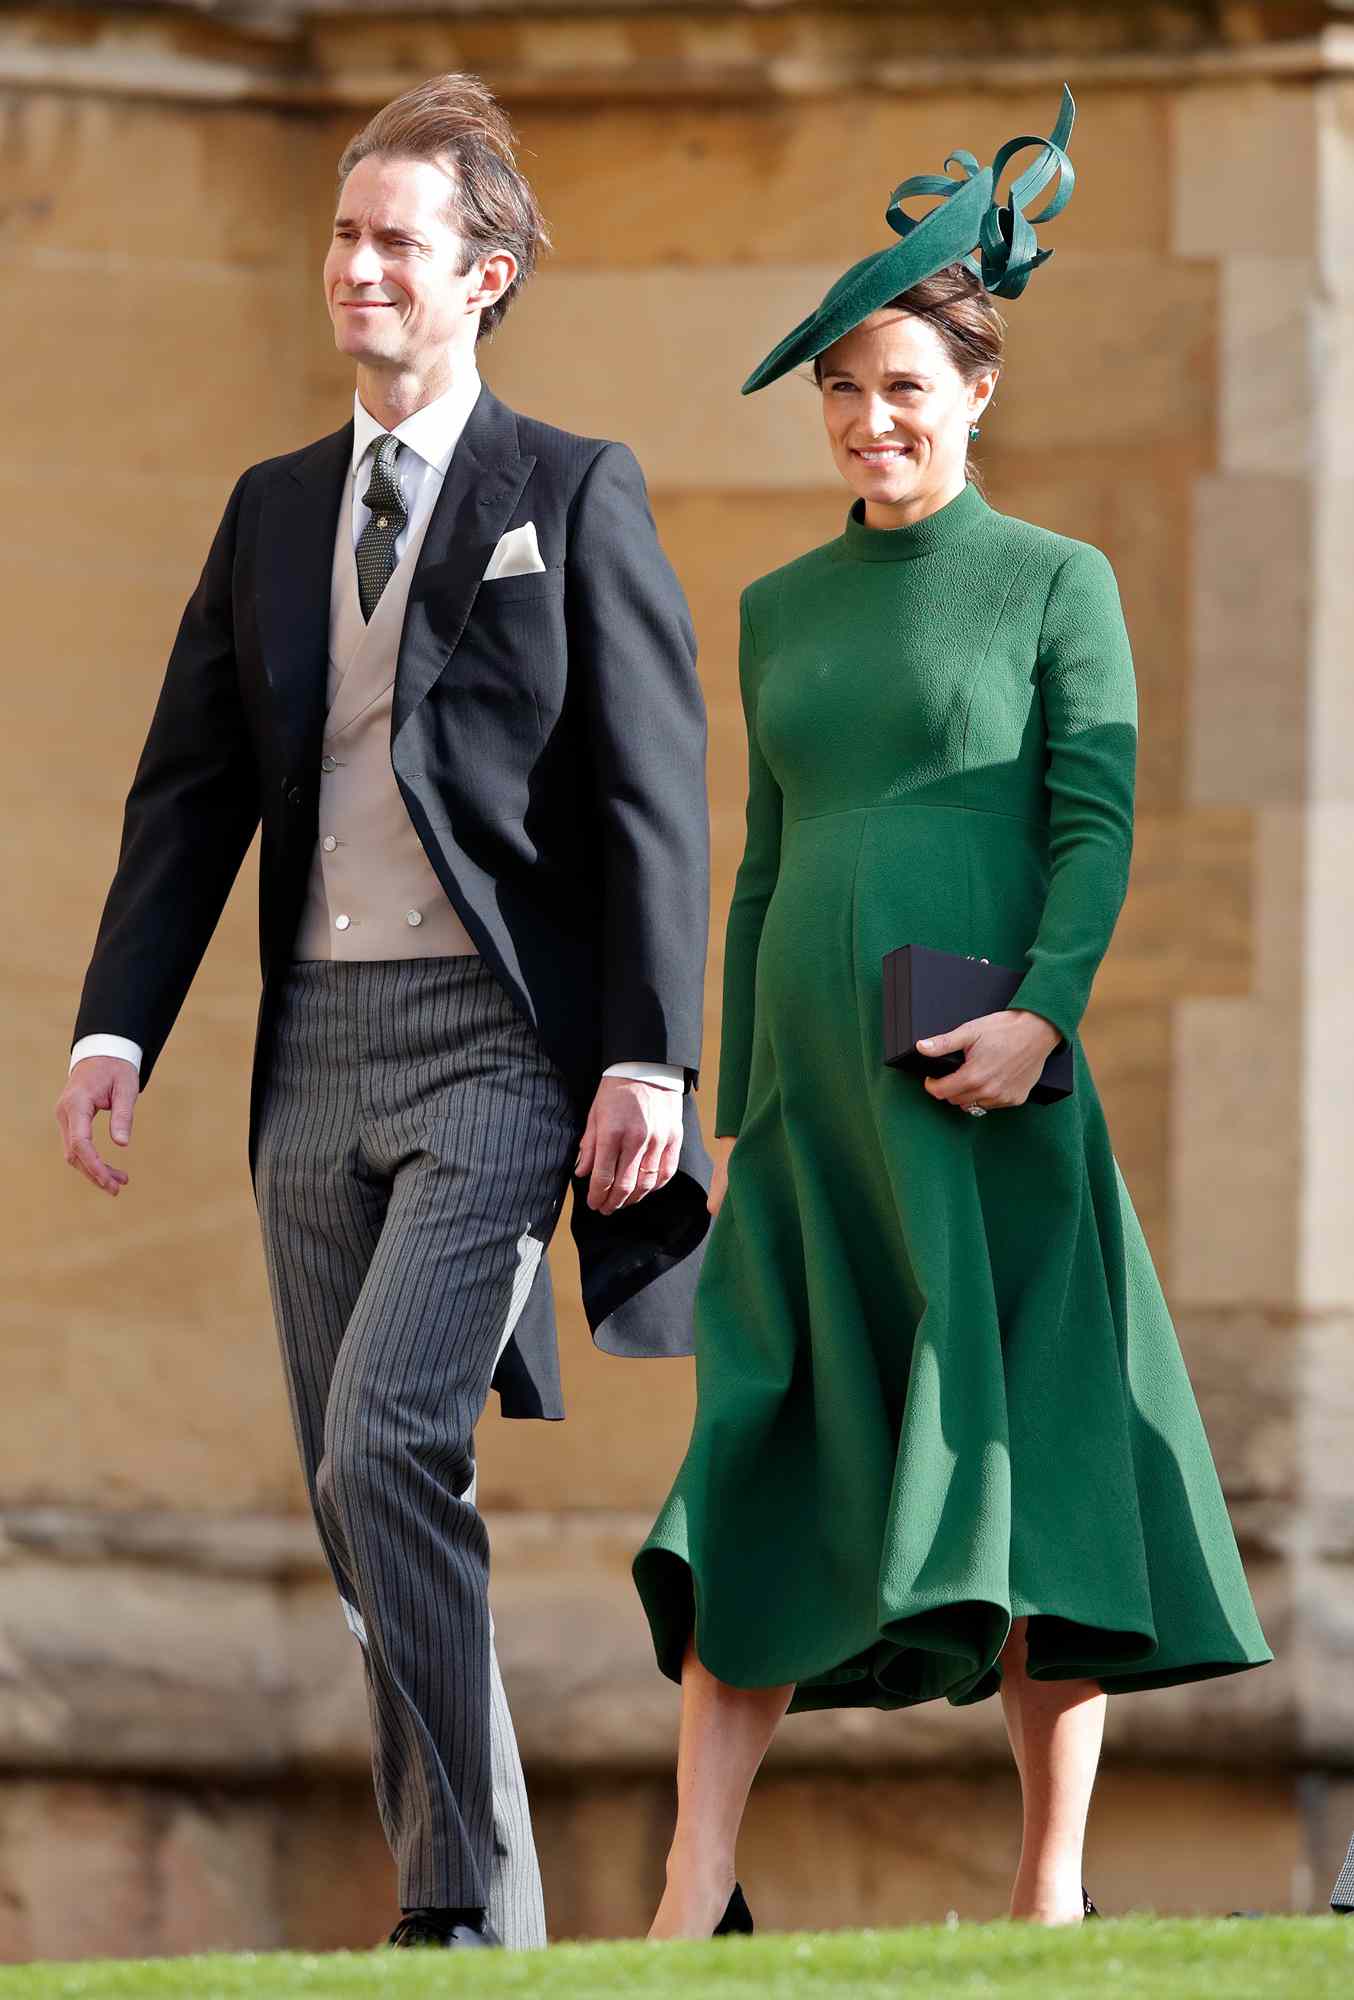 James Matthews and Pippa Middleton attends the wedding of Princess Eugenie of York and Jack Brooksbank at St George's Chapel on October 12, 2018 in Windsor, England